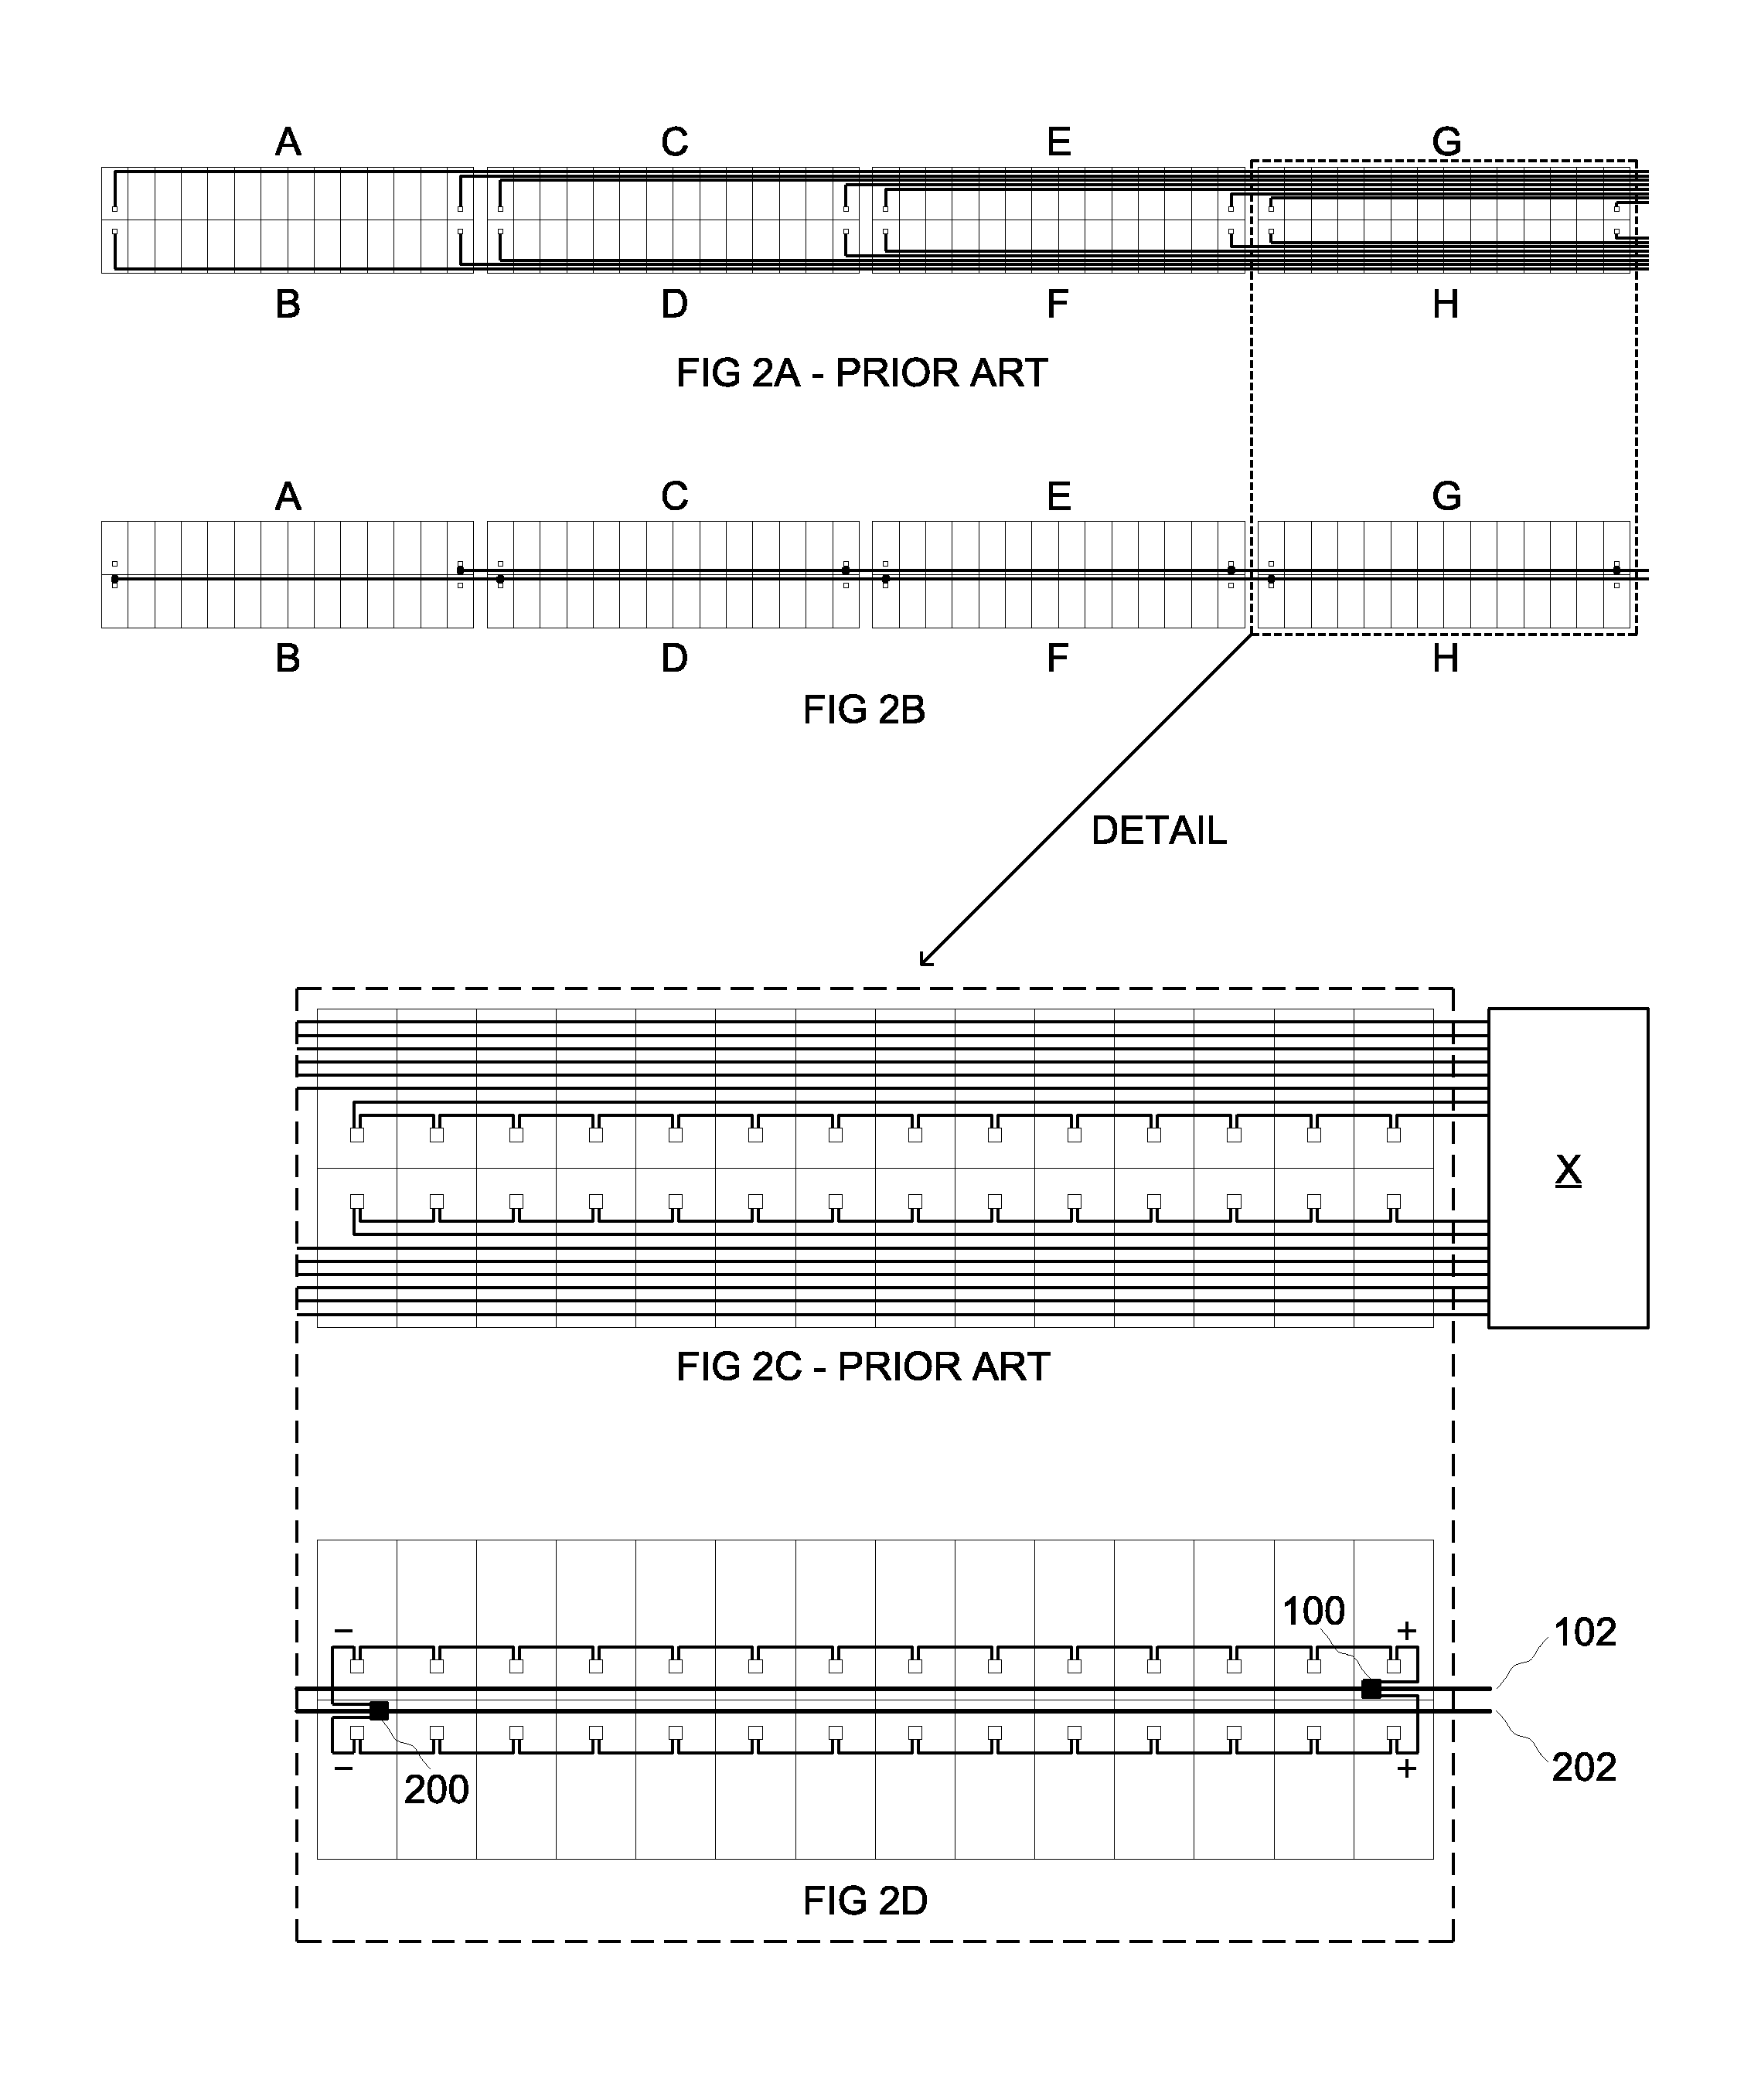 Photovoltaic string sub-combiner